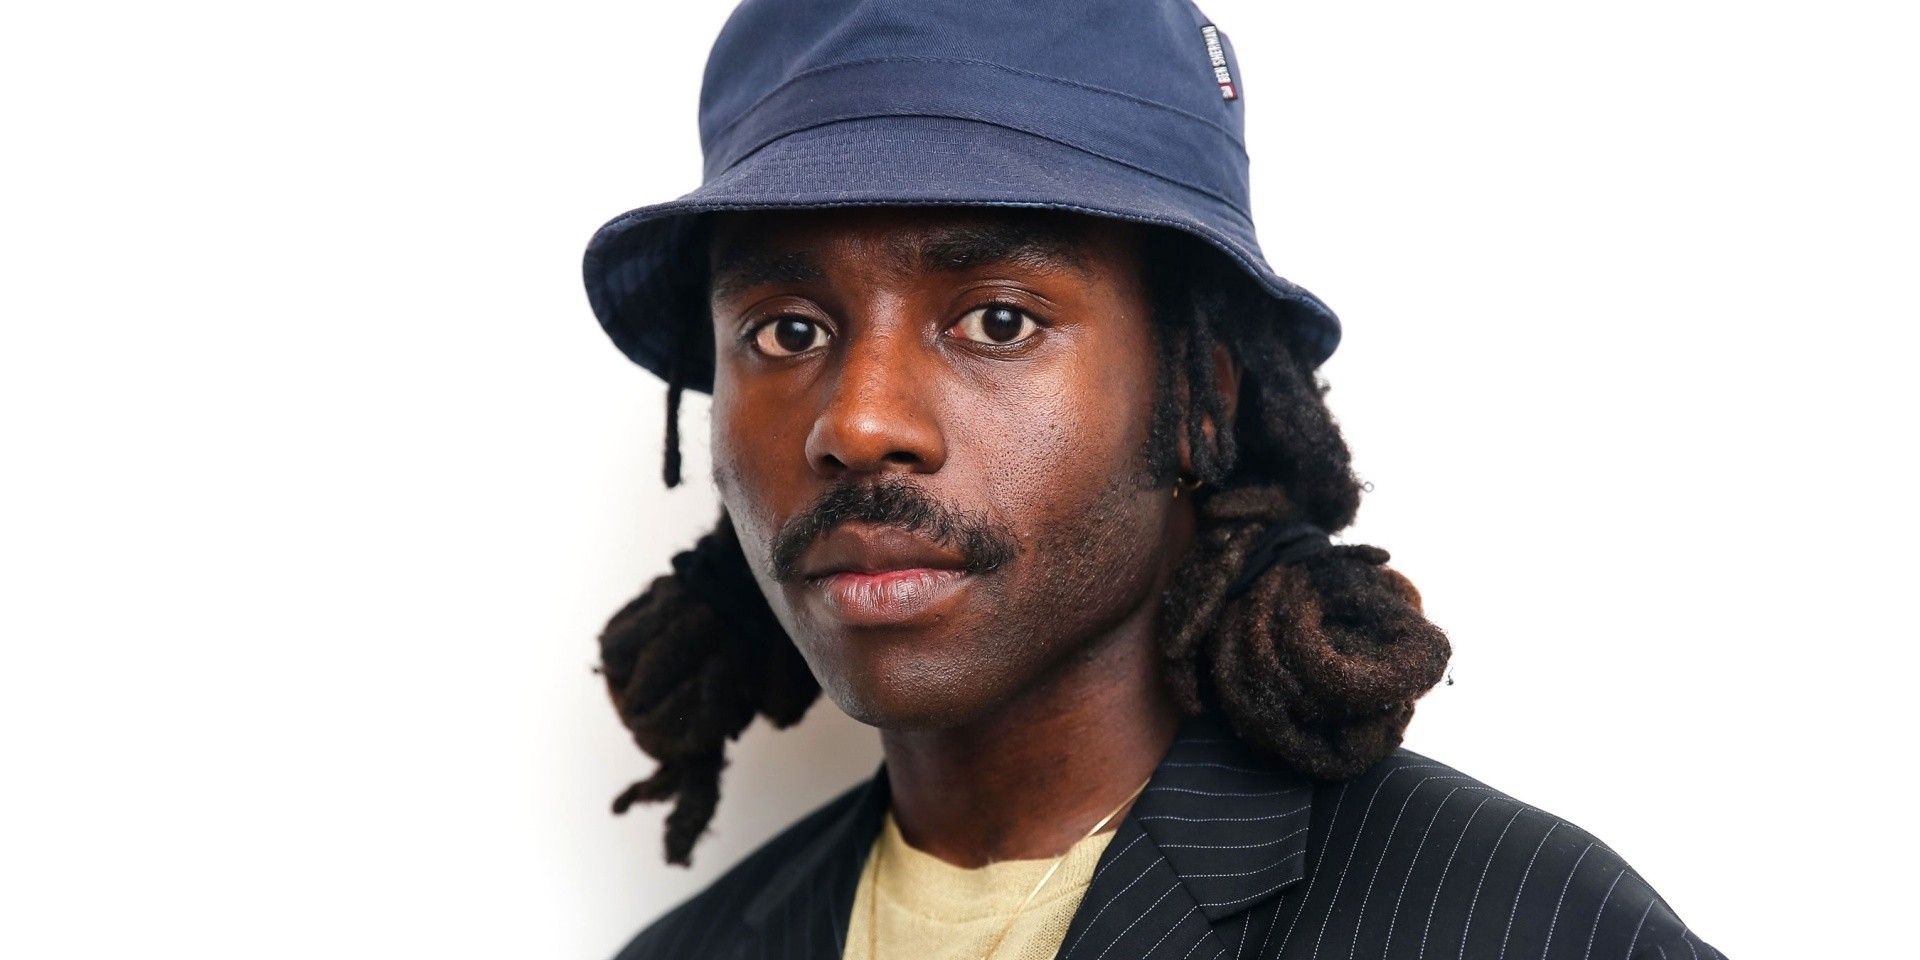 Blood Orange announces physical release to his mixtape, Angel’s Pulse